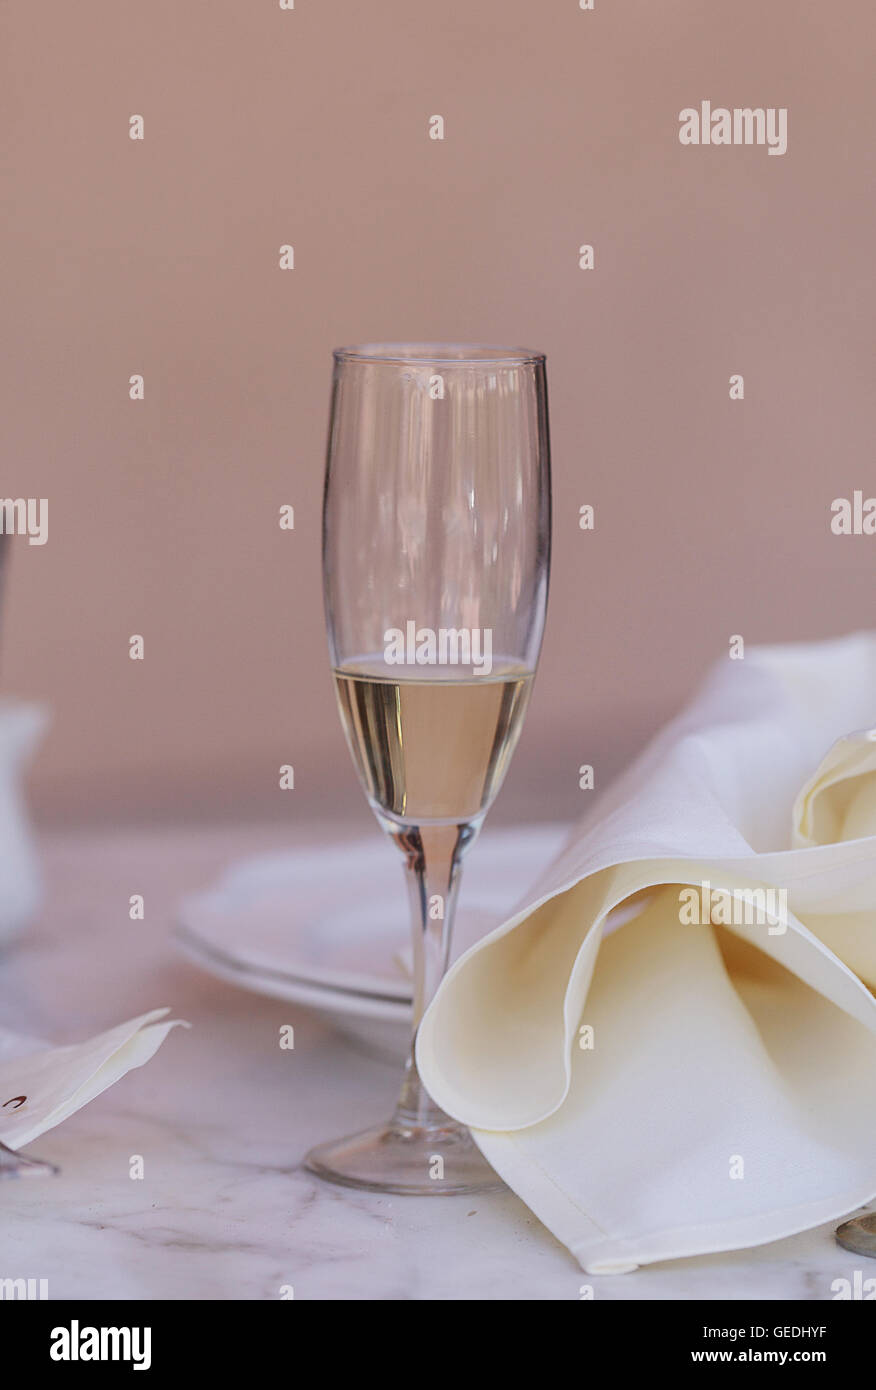 A place setting with a glass of champaign at an outdoor cafe restaurant in Southern California, United States. Stock Photo